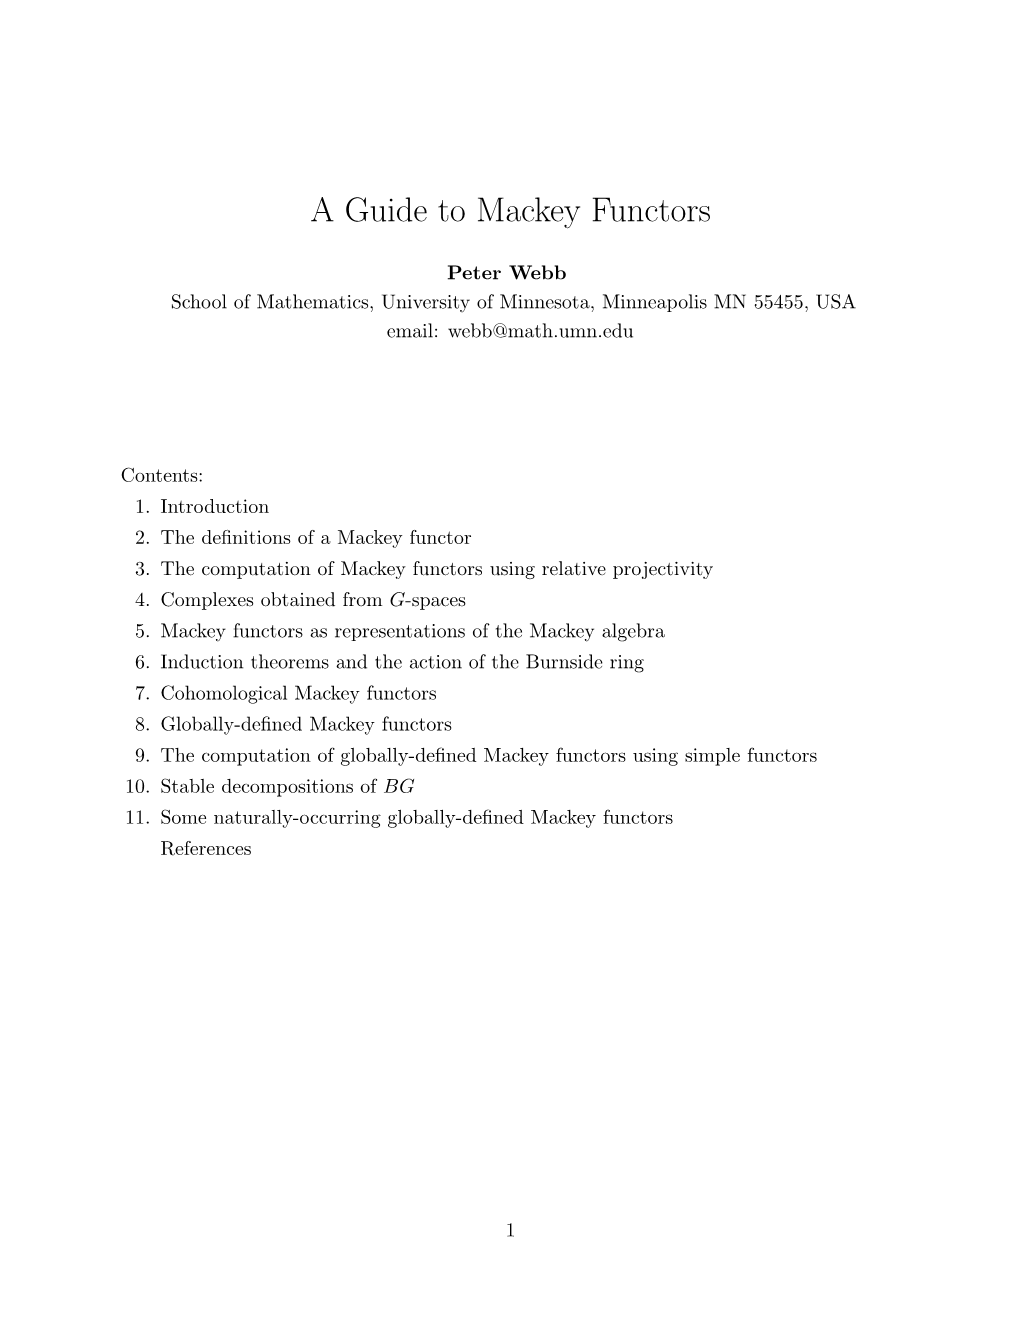 A Guide to Mackey Functors